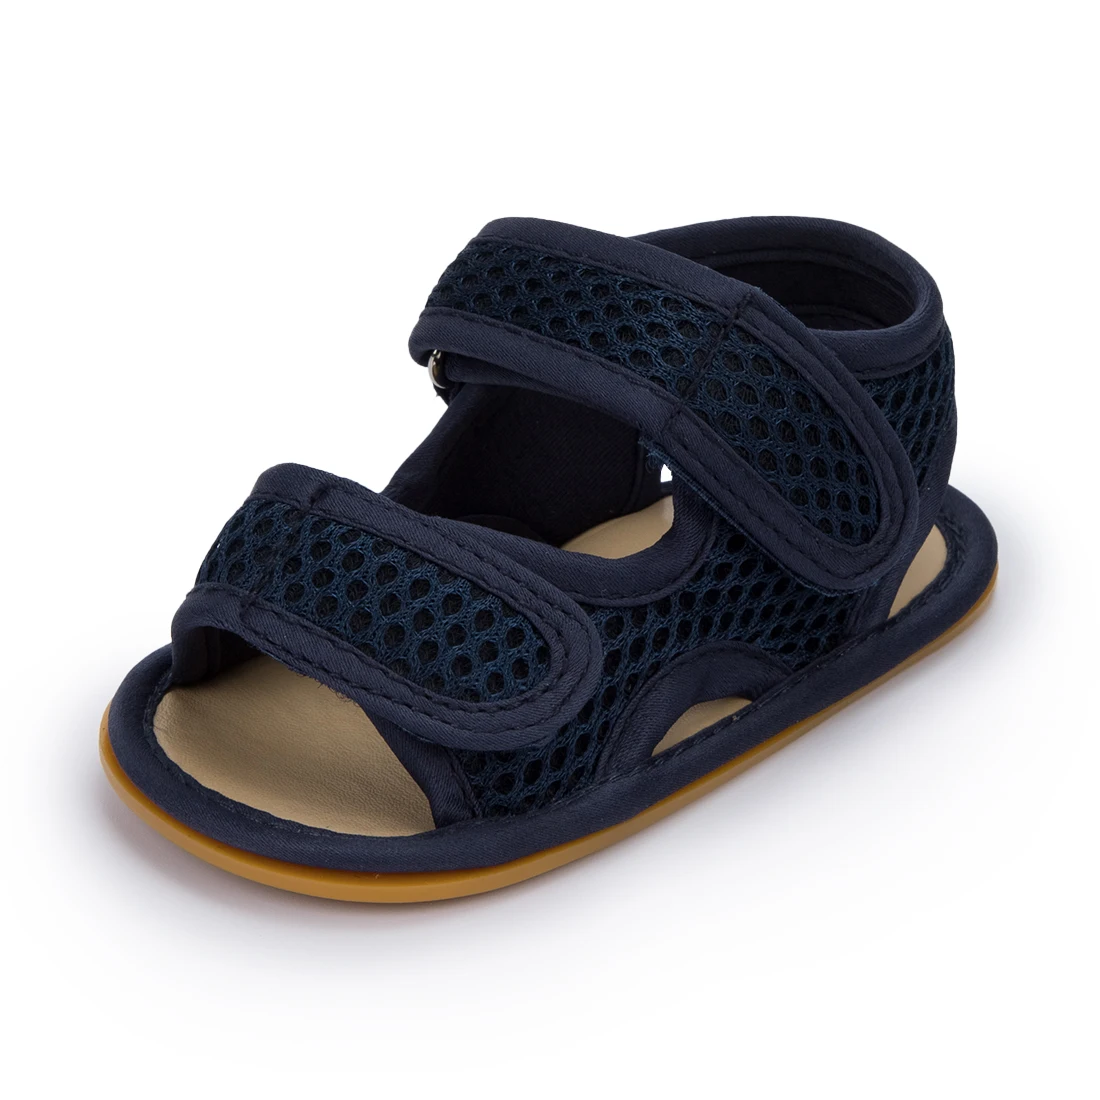 Y sandals girls boys shoes solid color summer outdoor soft sole anti slip rubber infant thumb200